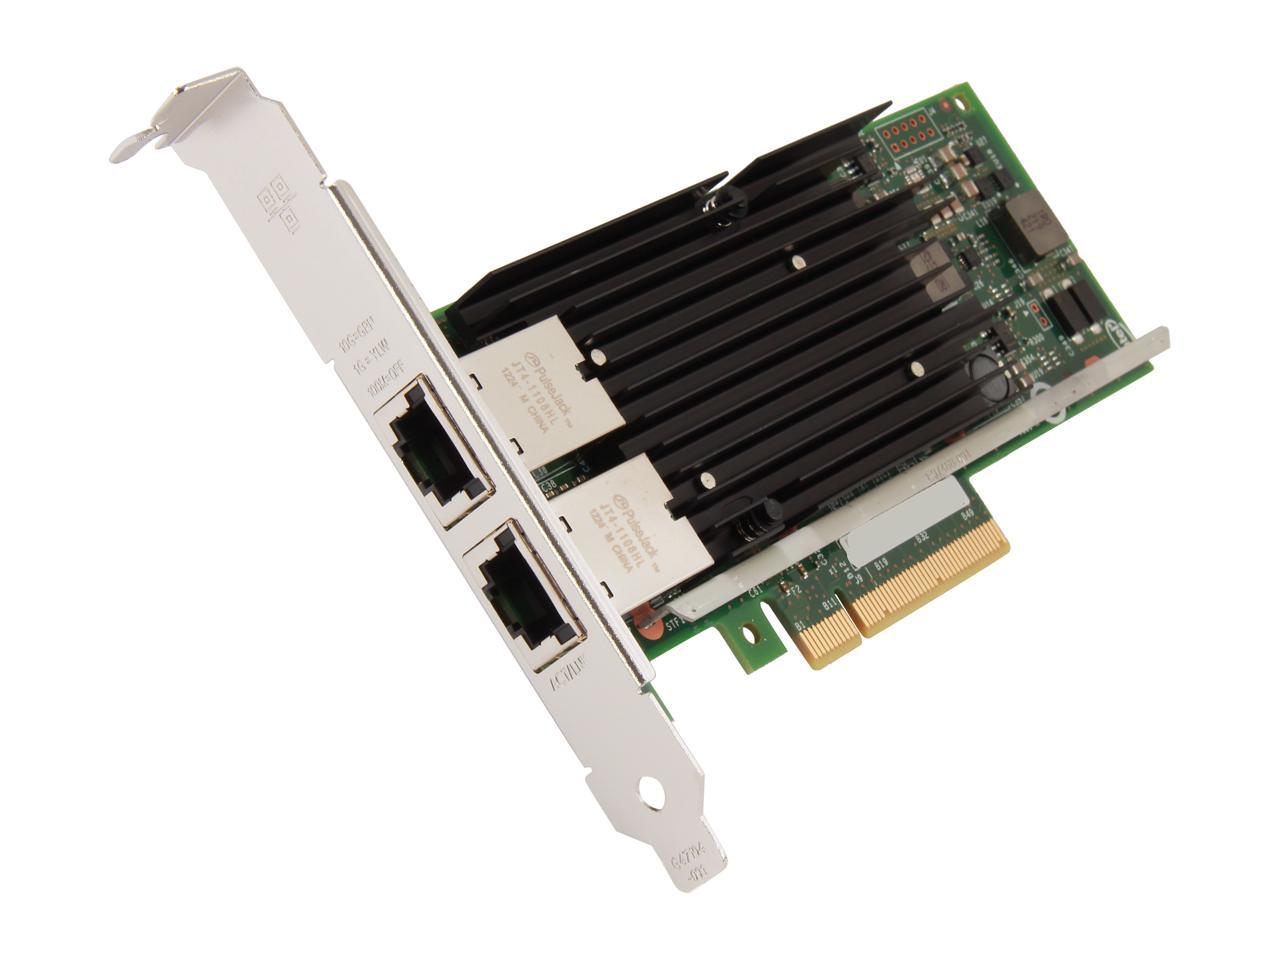 Intel X540T2 Ethernet Converged Network Adapter 100Mbps/1Gbps/10Gbps PCI Express 2.1 x8 2 x RJ45